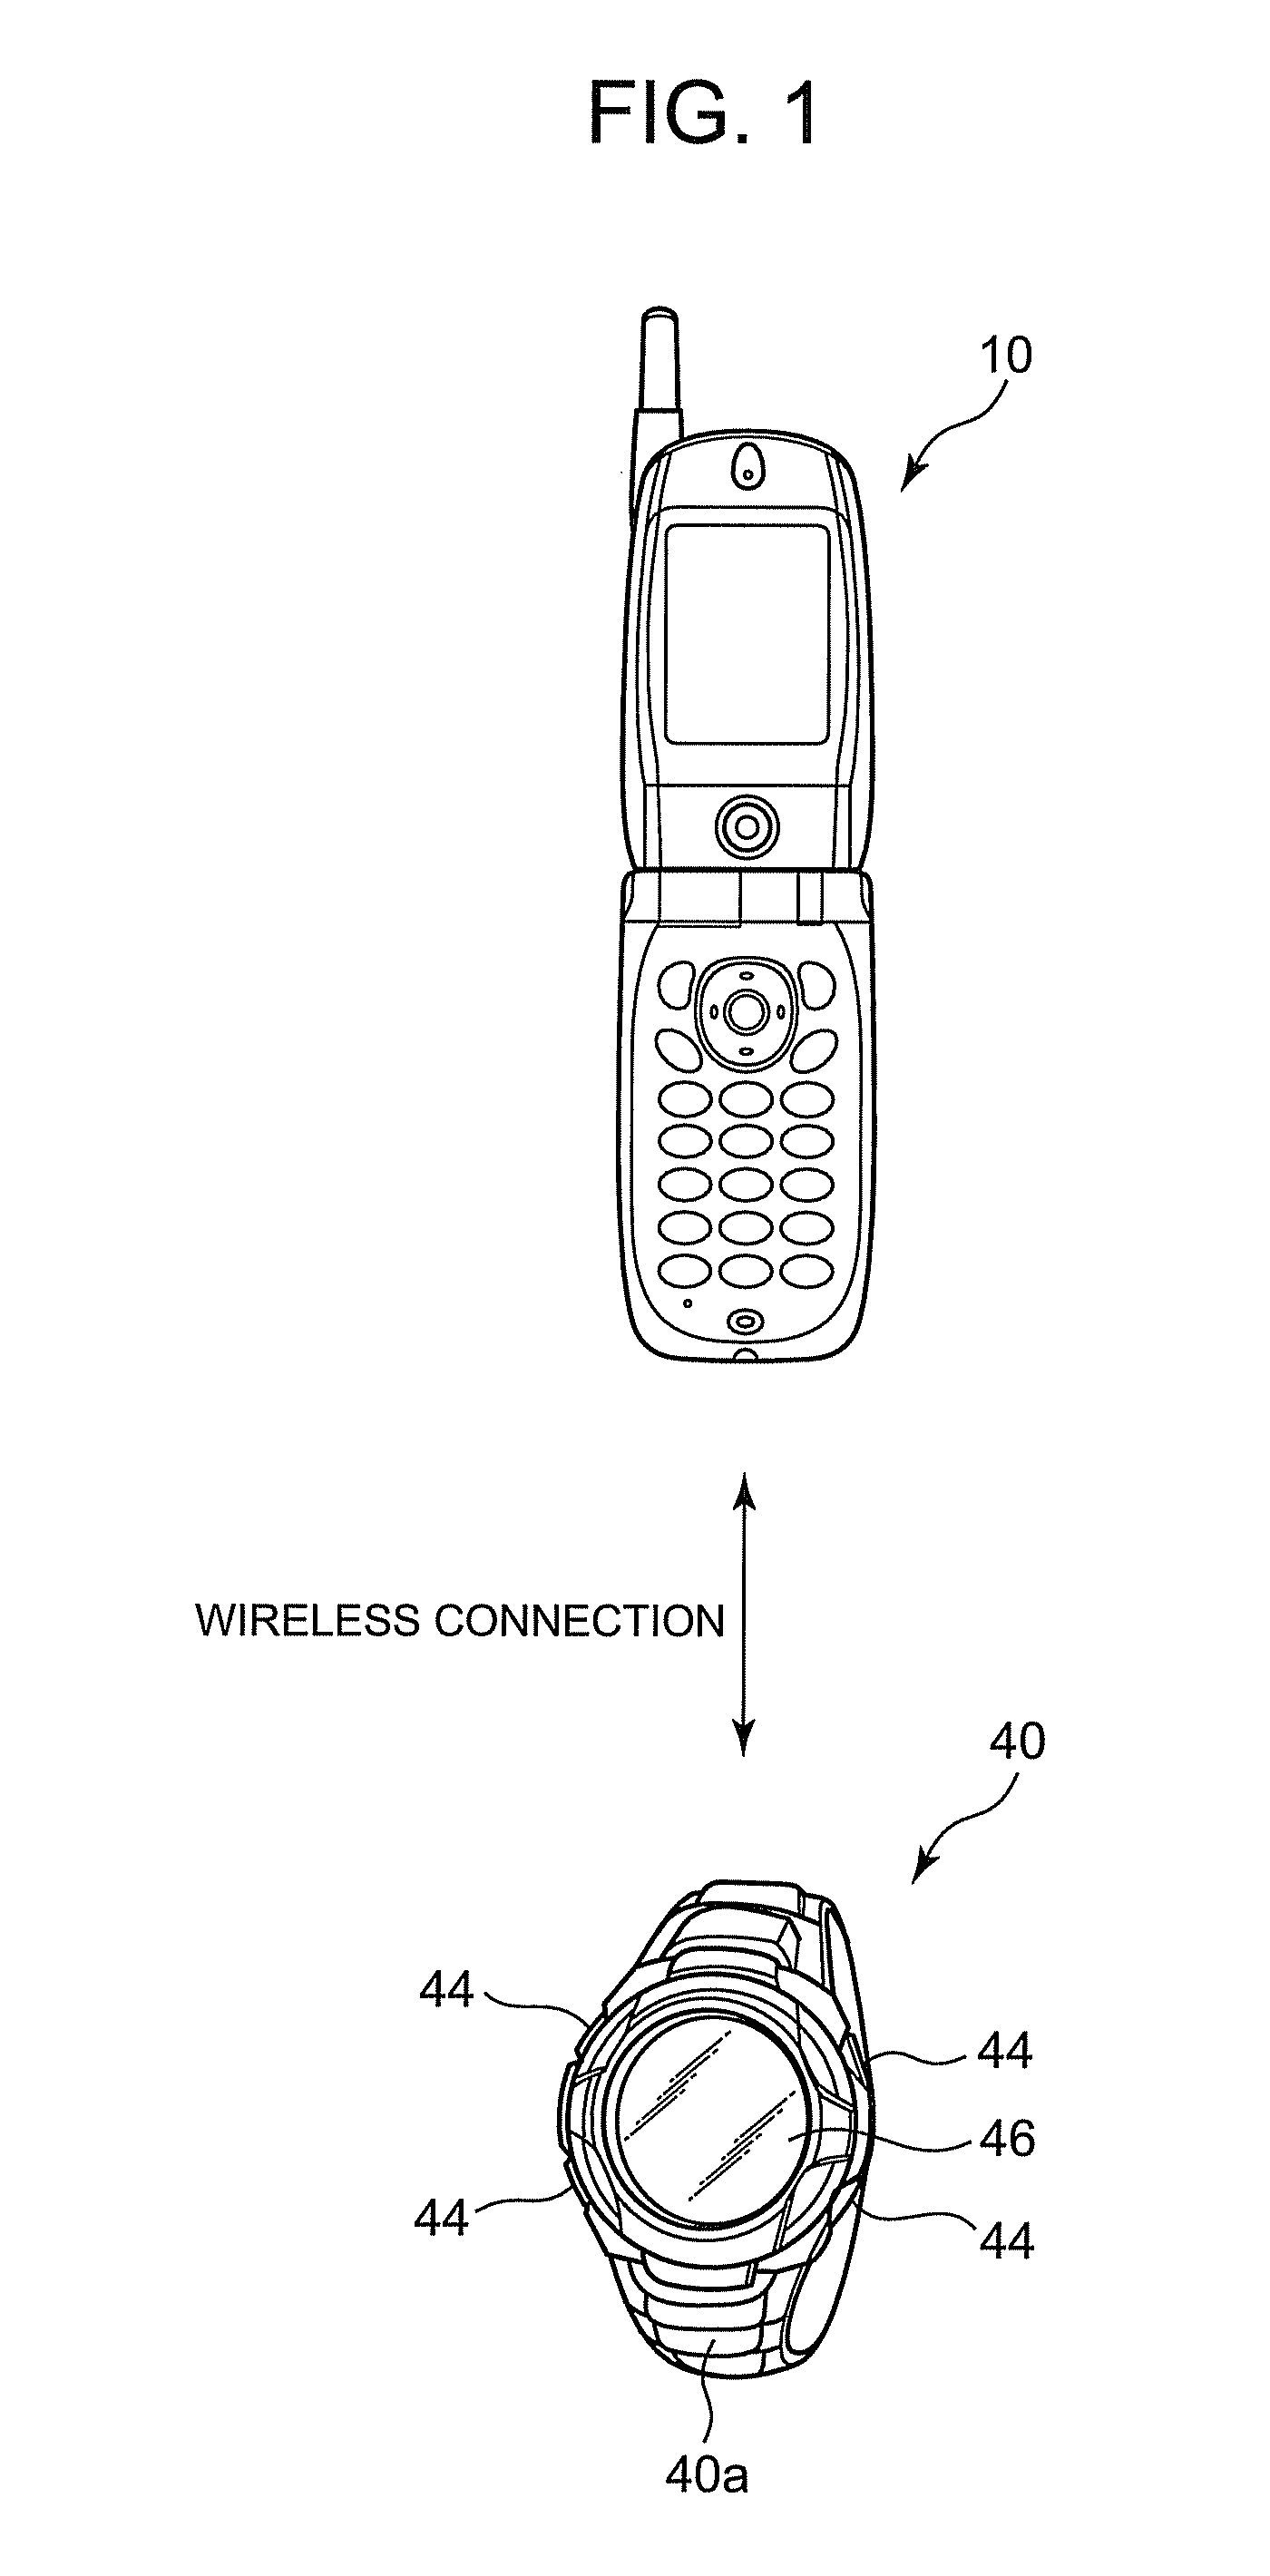 Electronic device provided with wireless communication function, detection of whether the electronic device is in a used condition or an unused condition function, and shifting the electronic device to a power-saving mode function